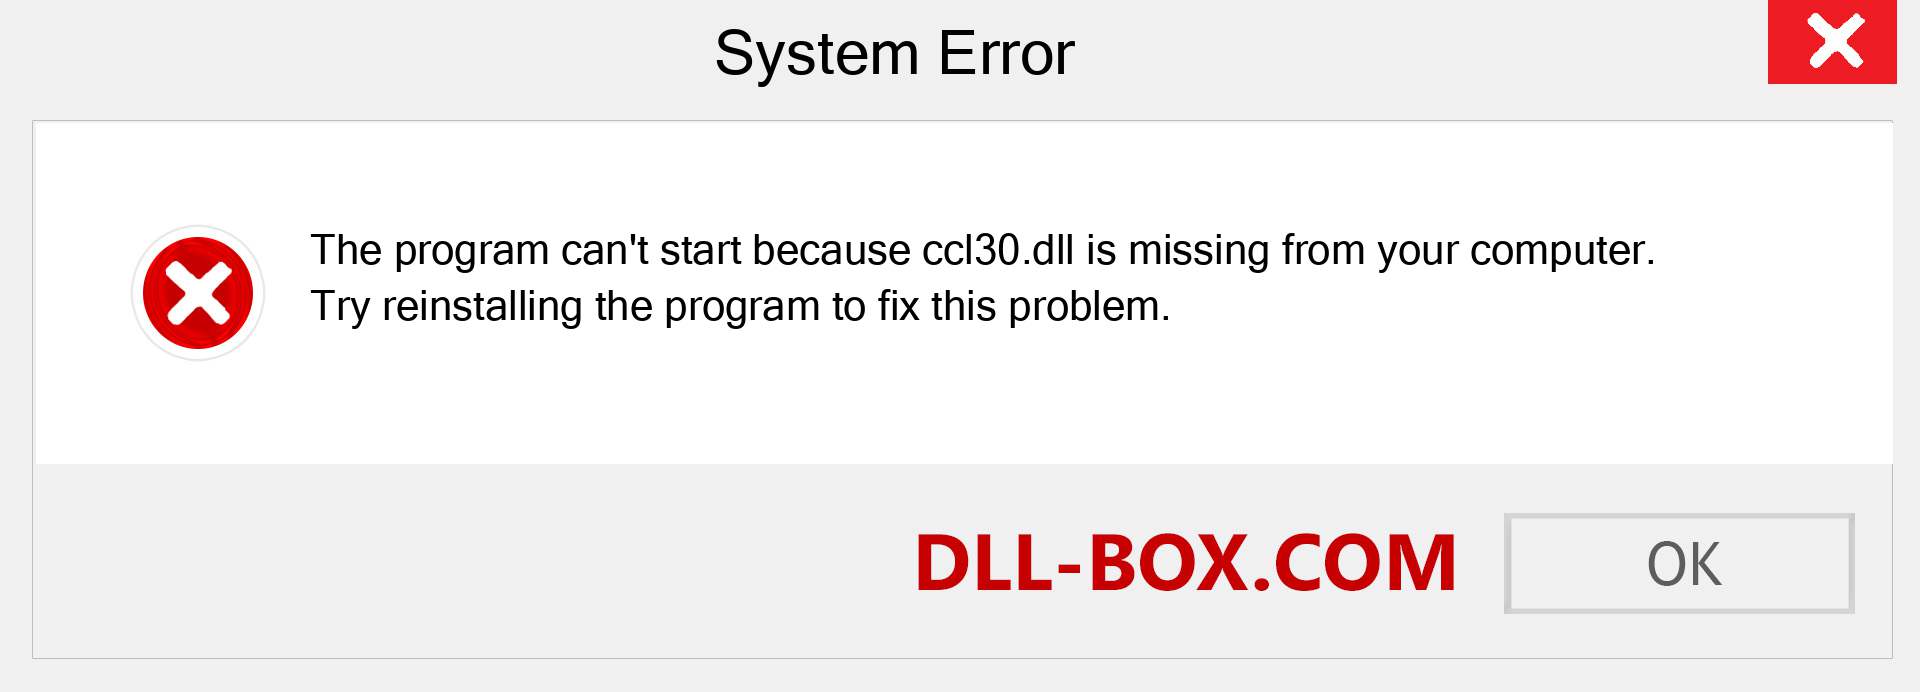  ccl30.dll file is missing?. Download for Windows 7, 8, 10 - Fix  ccl30 dll Missing Error on Windows, photos, images